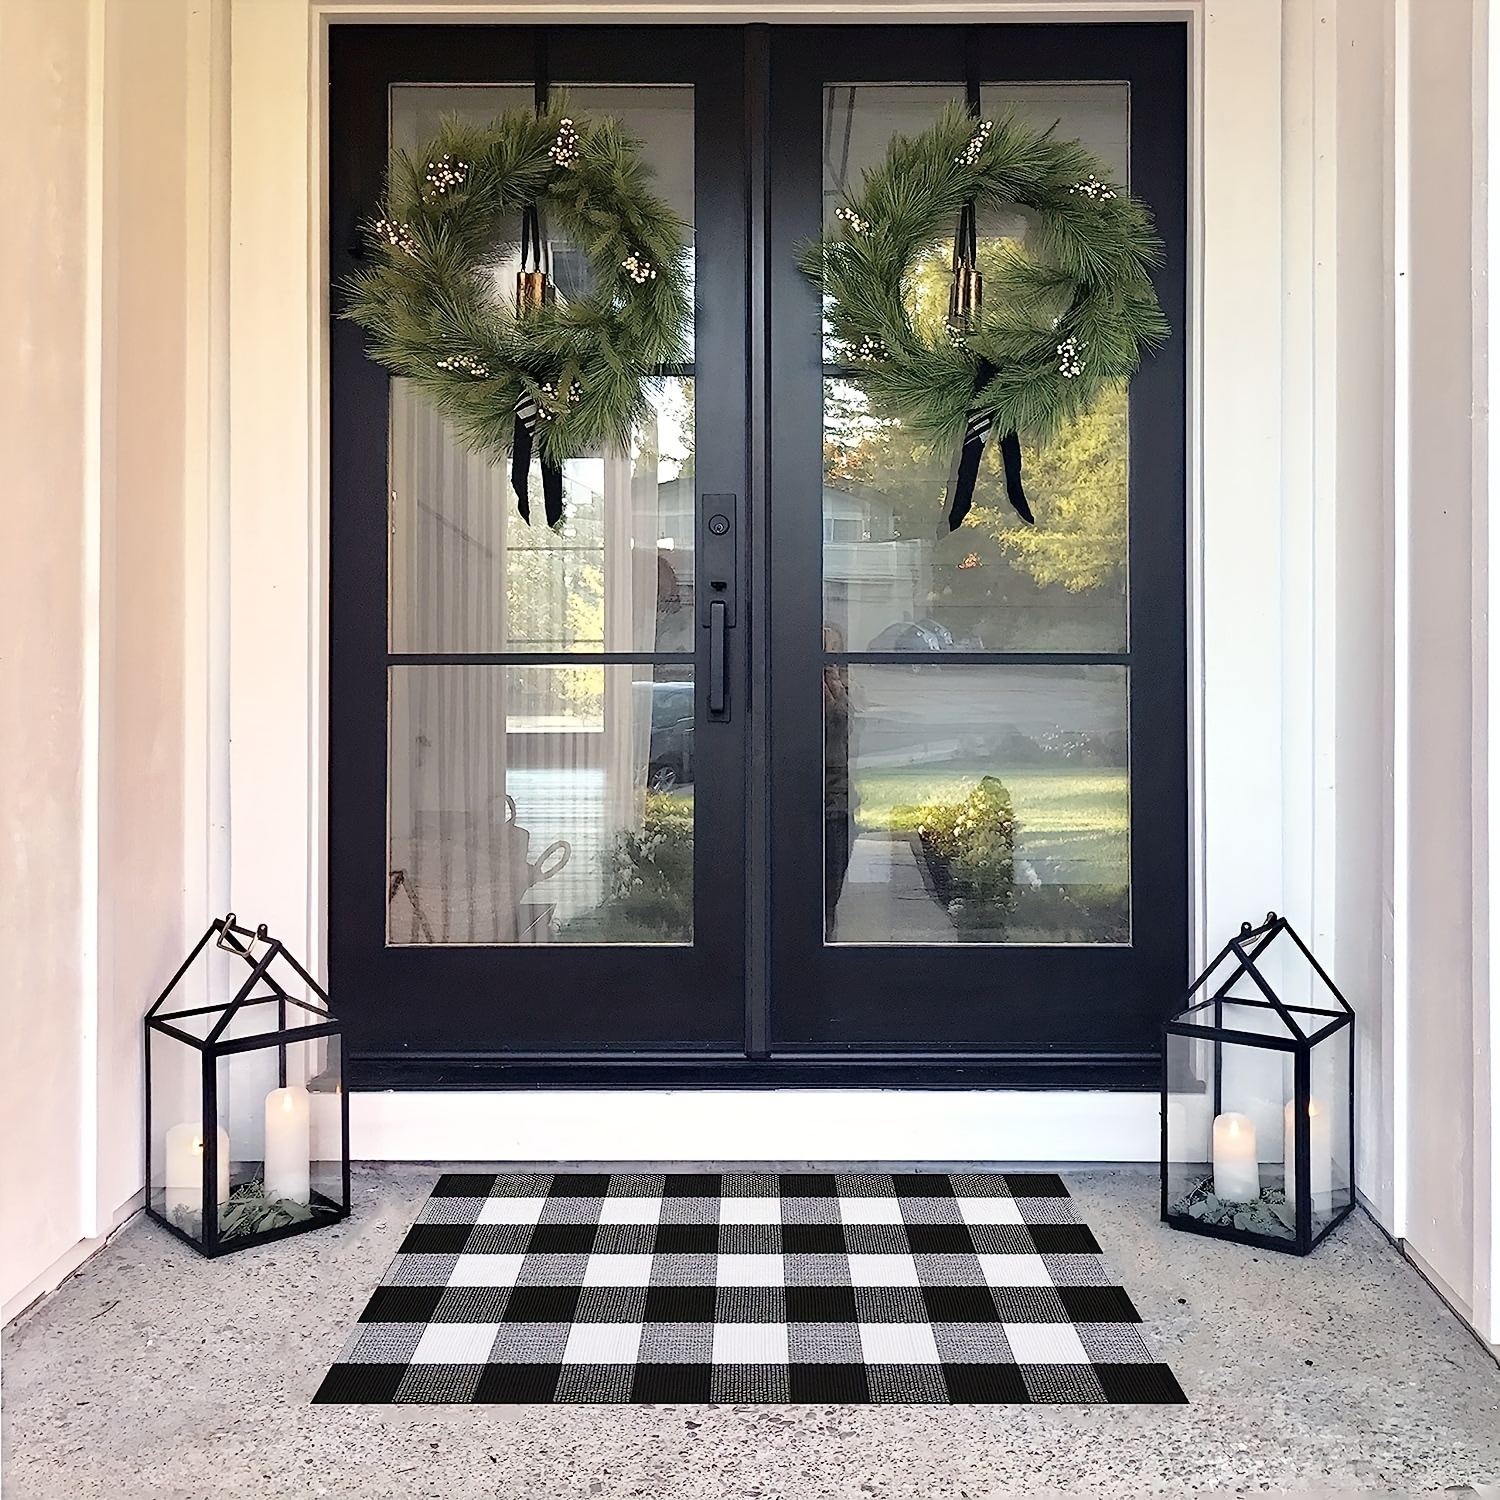 Buffalo Plaid Doormat, Black And White Hand Woven Checked Rugs